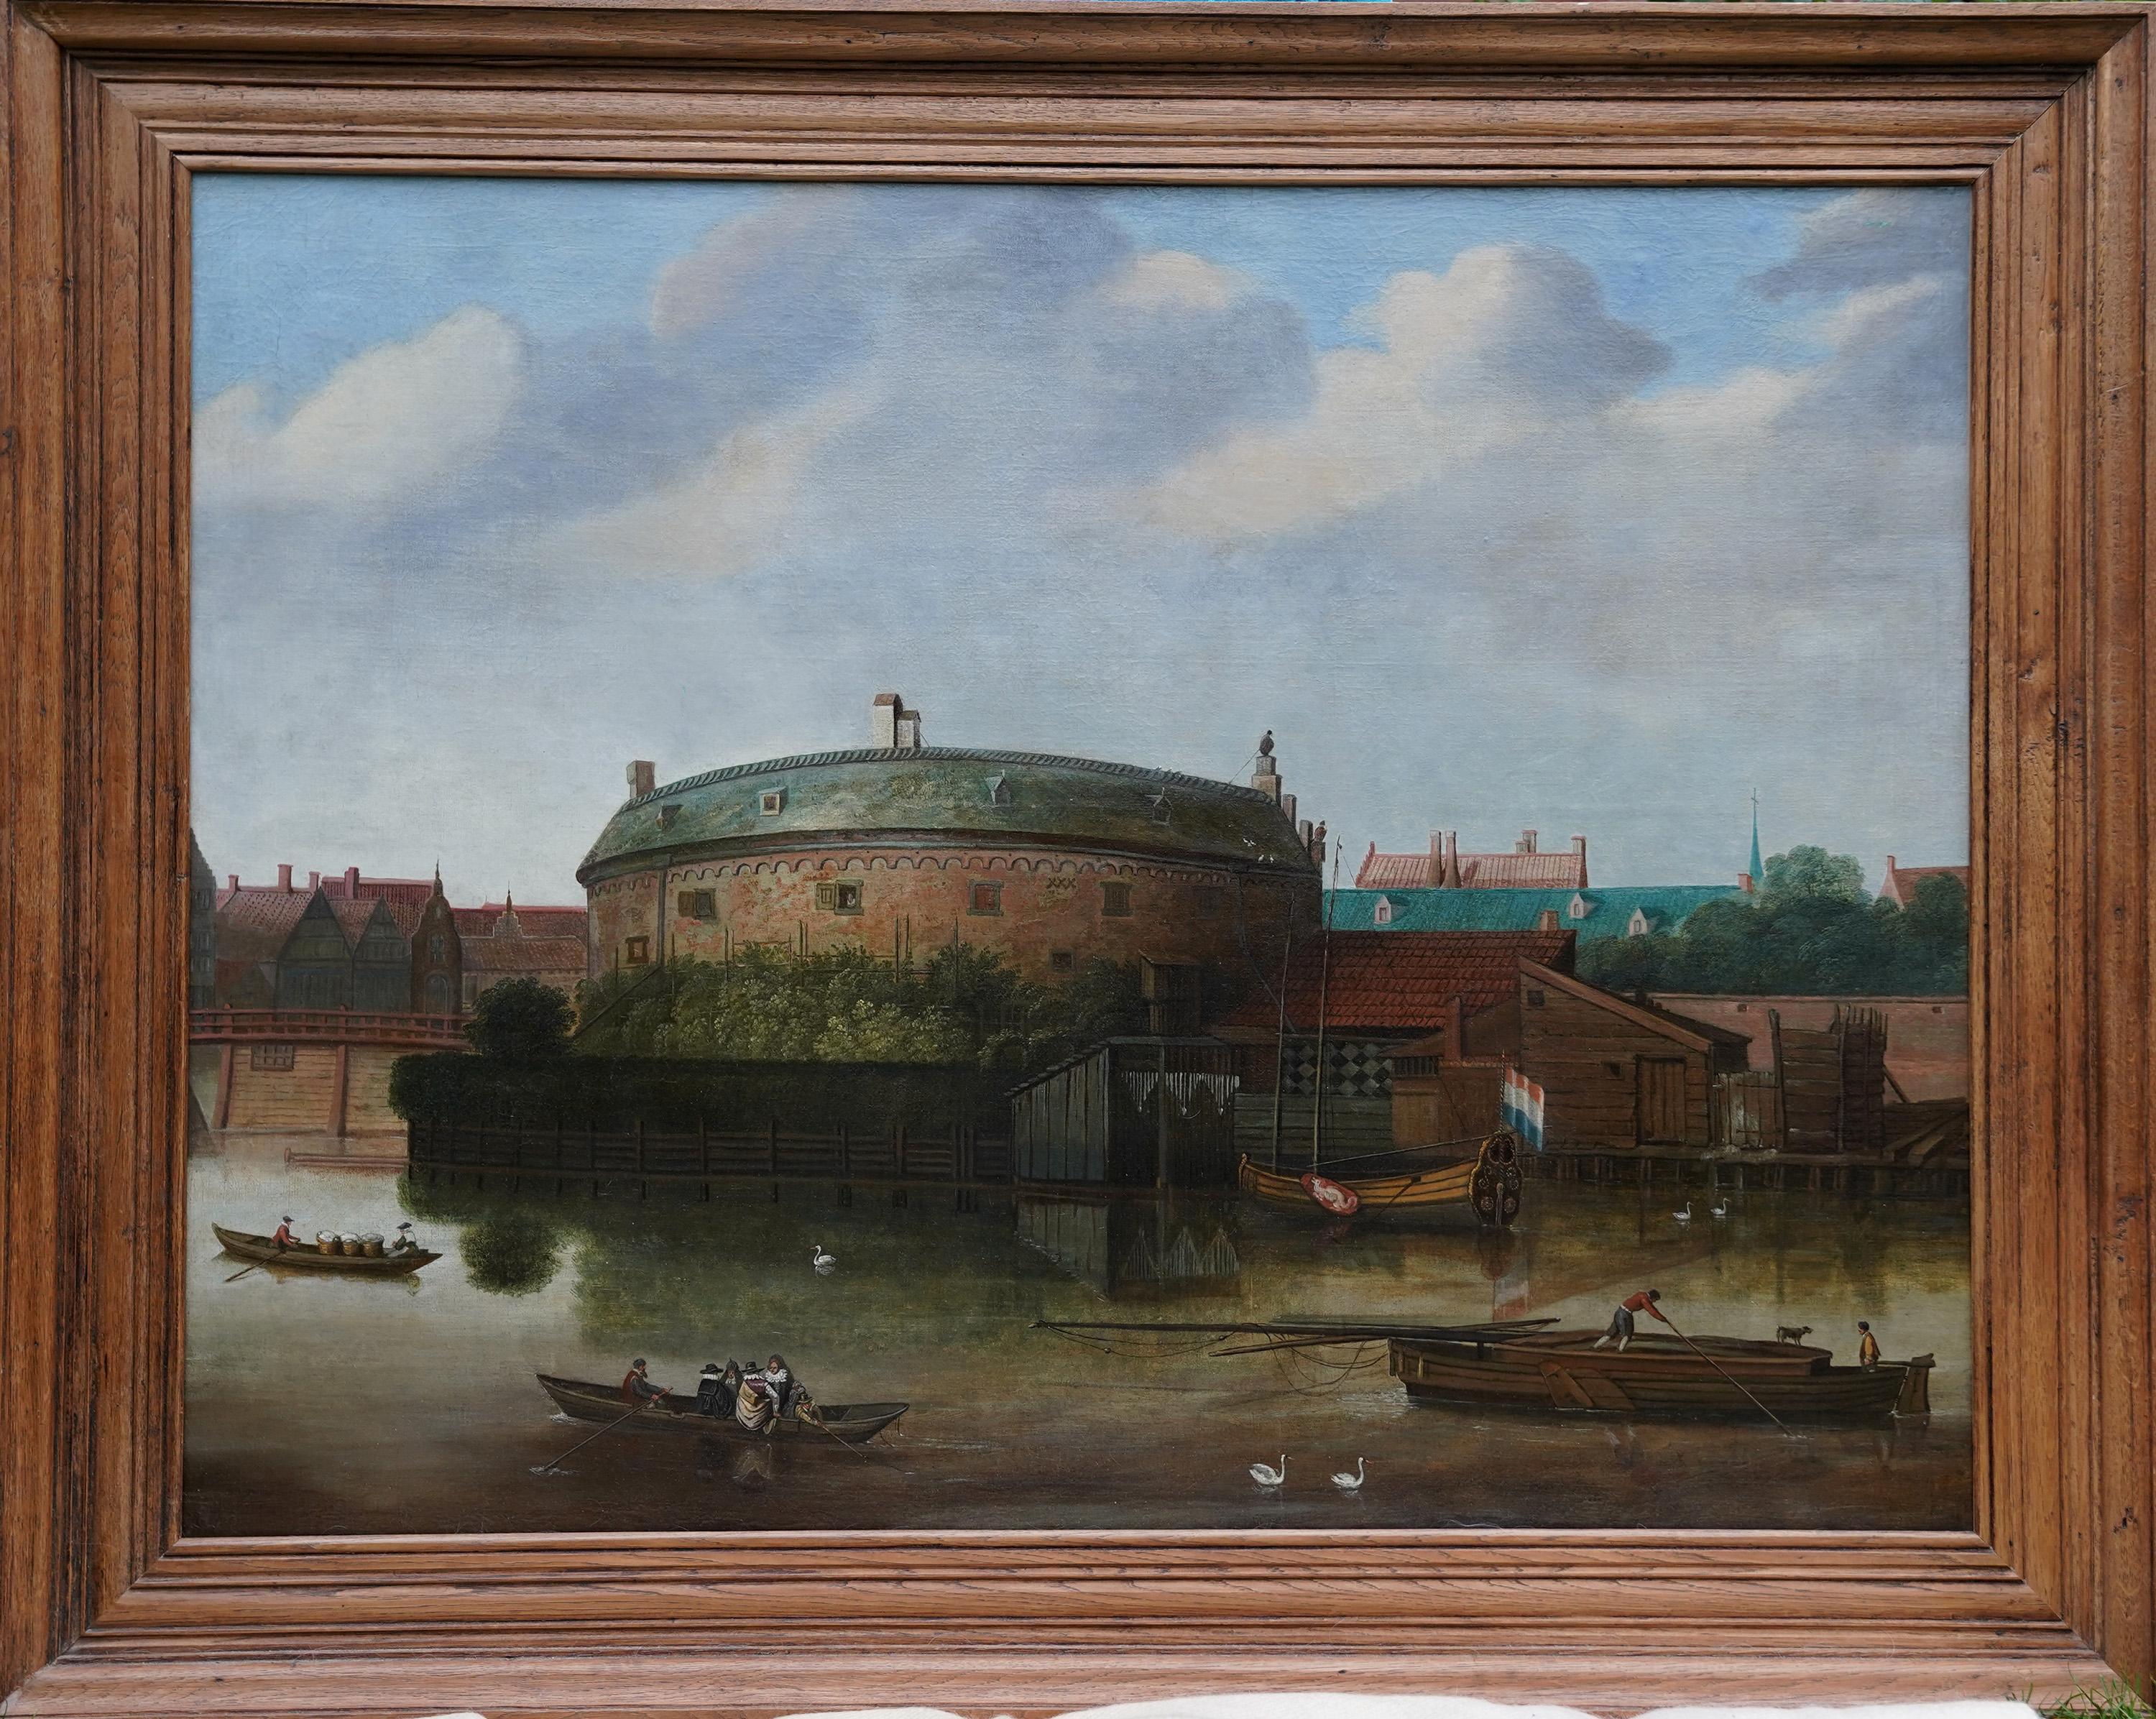 River Scene with Boats and Rotunda Building - Dutch 18th/19thC art oil painting For Sale 8